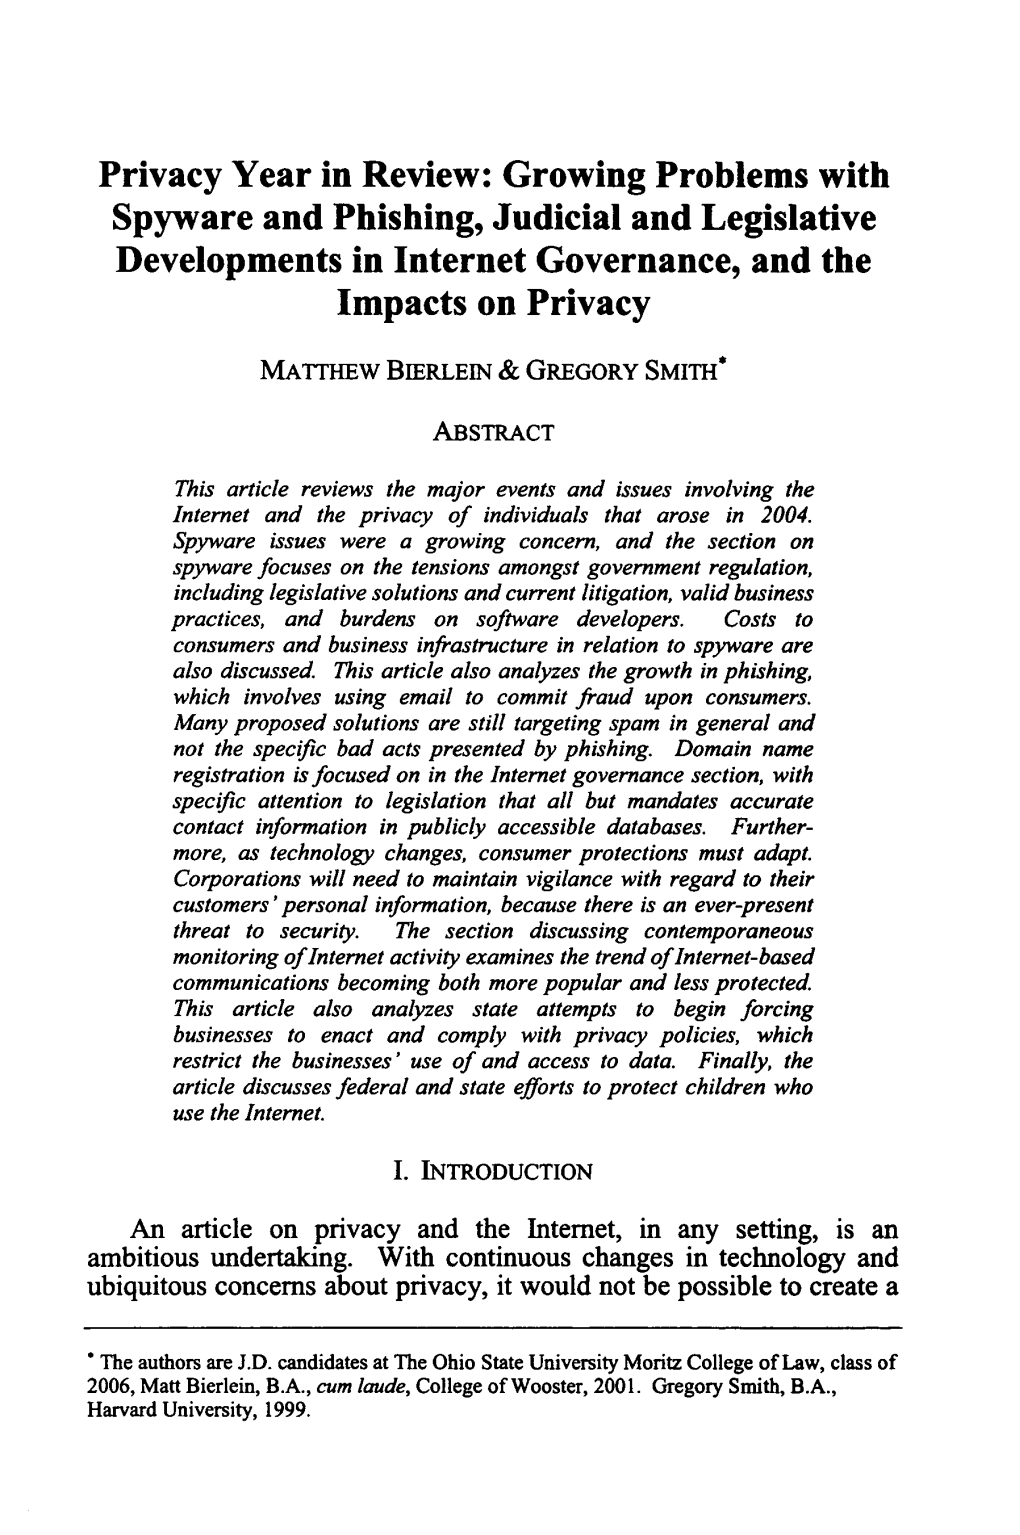 Growing Problems with Spyware and Phishing, Judicial and Legislative Developments in Internet Governance, and the Impacts on Privacy